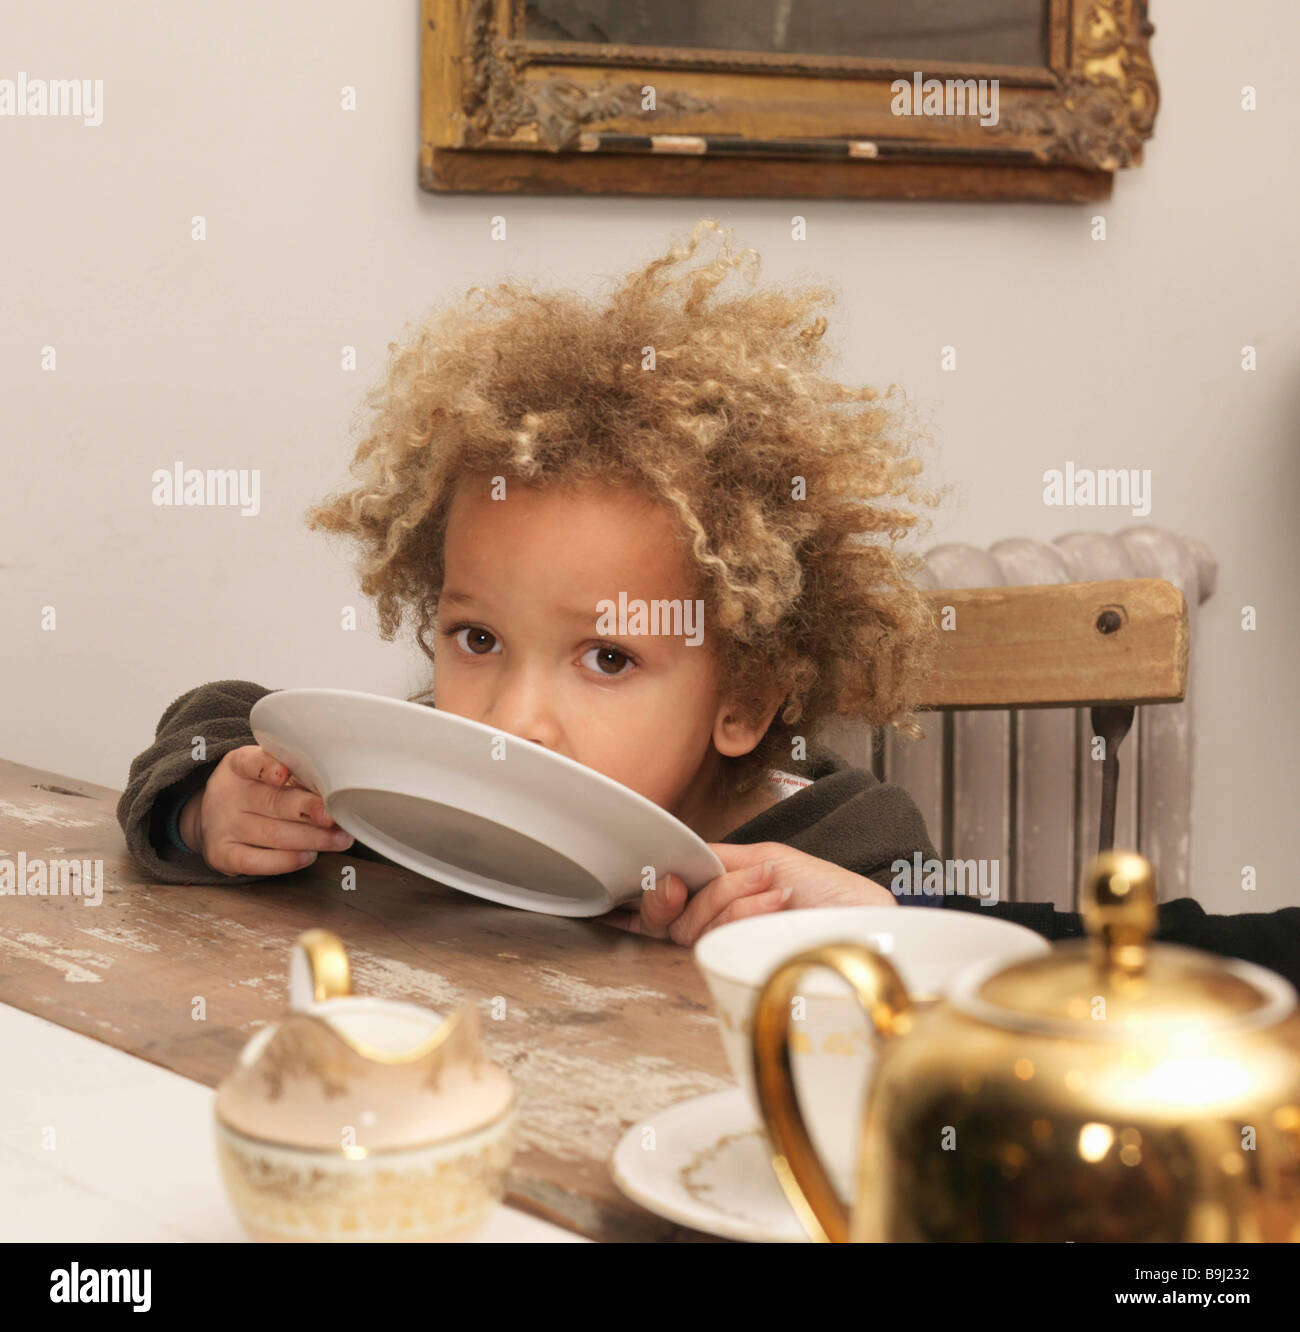 Young boy licking plate Stock Photo